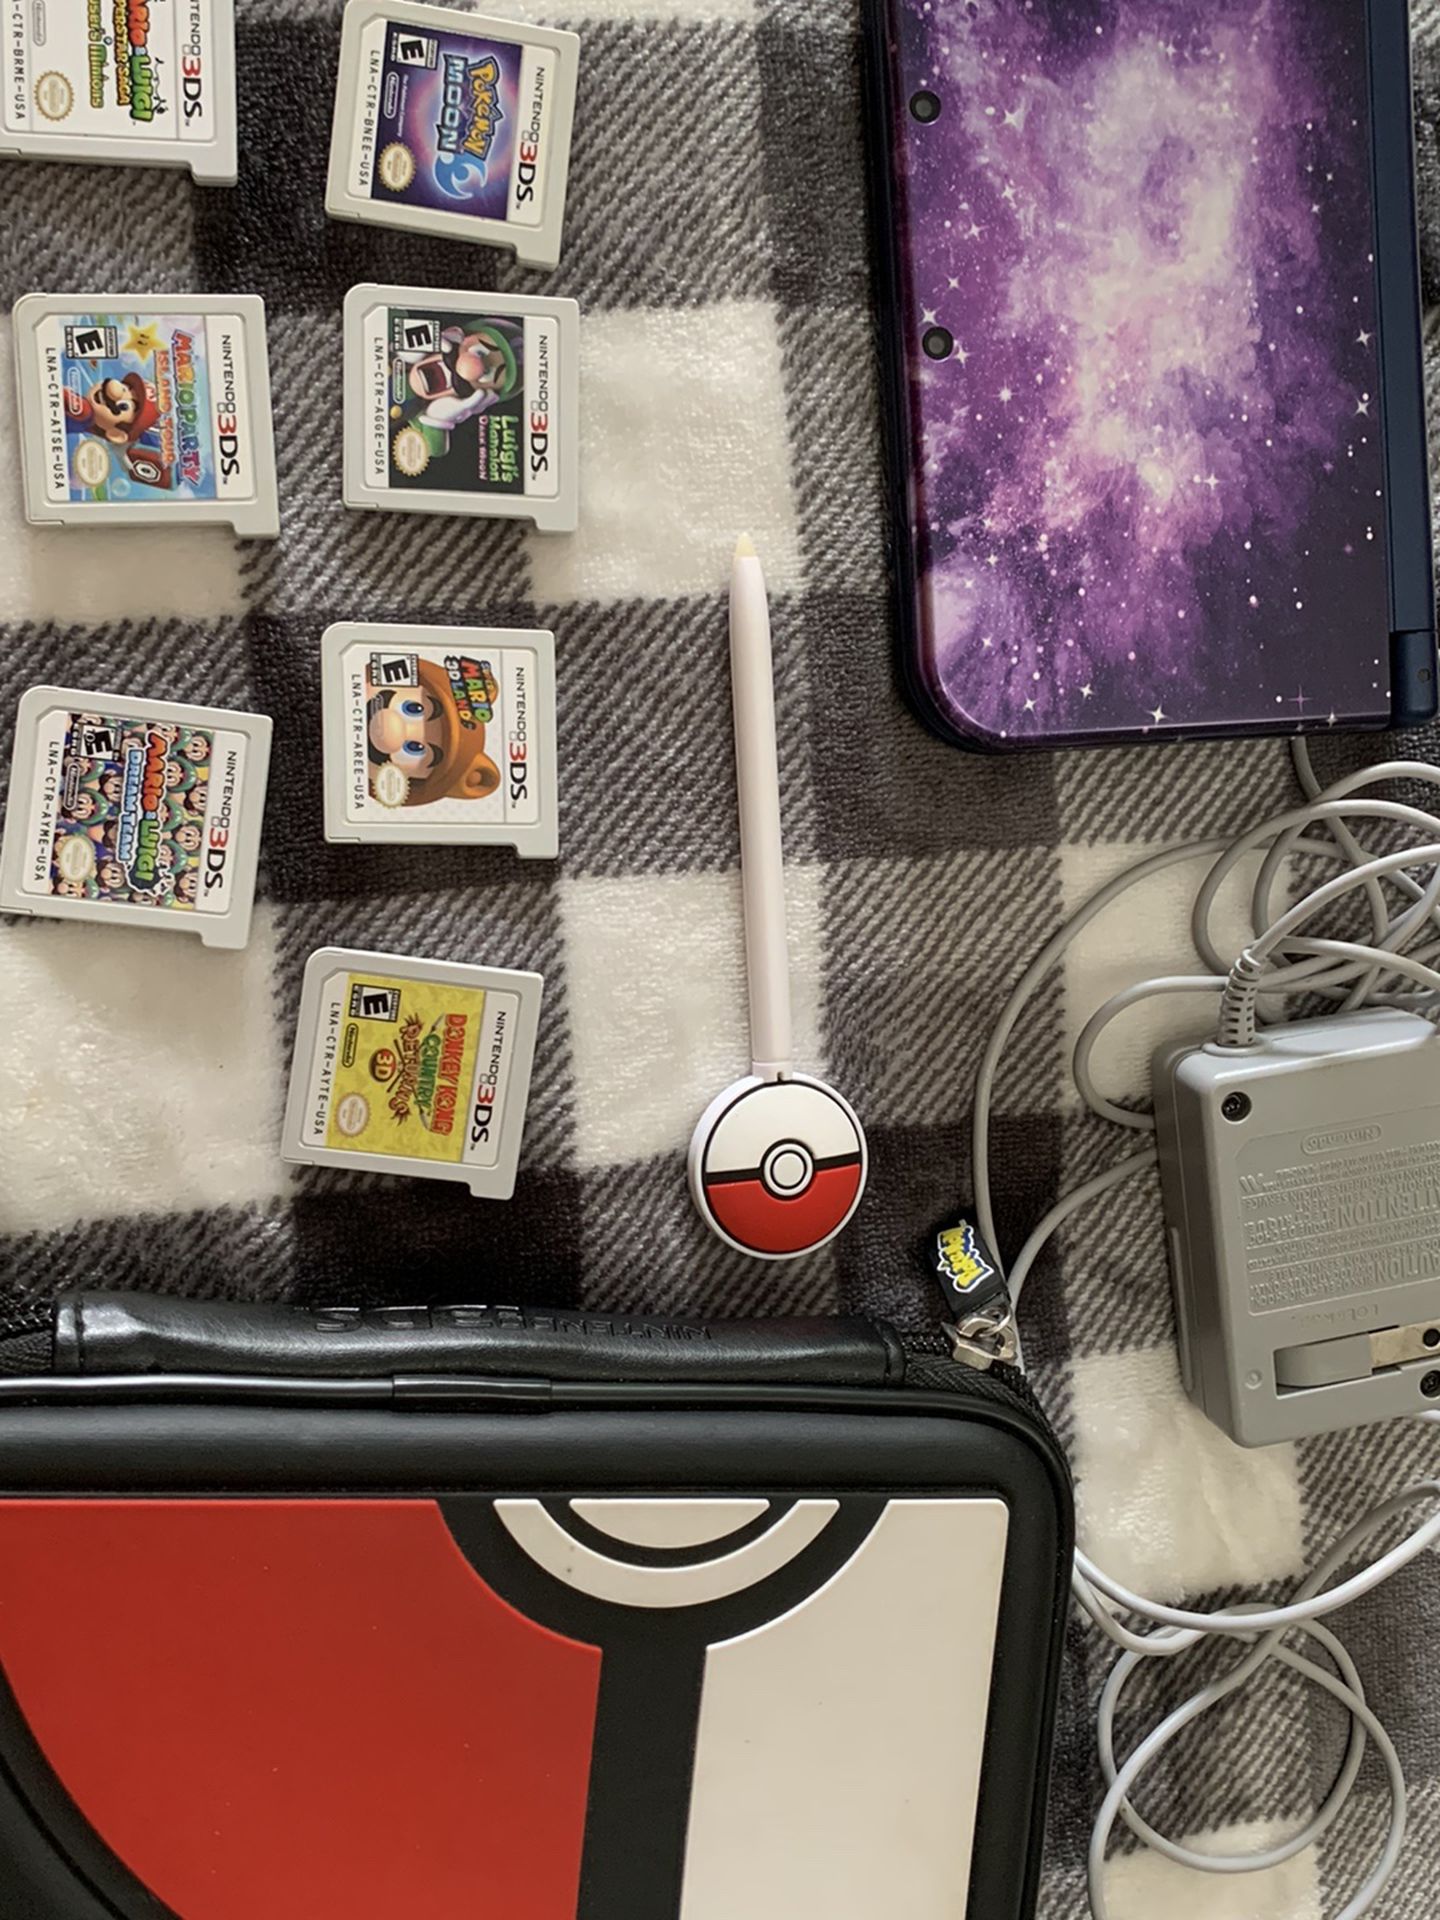 Nintendo 3DS XL,games and case